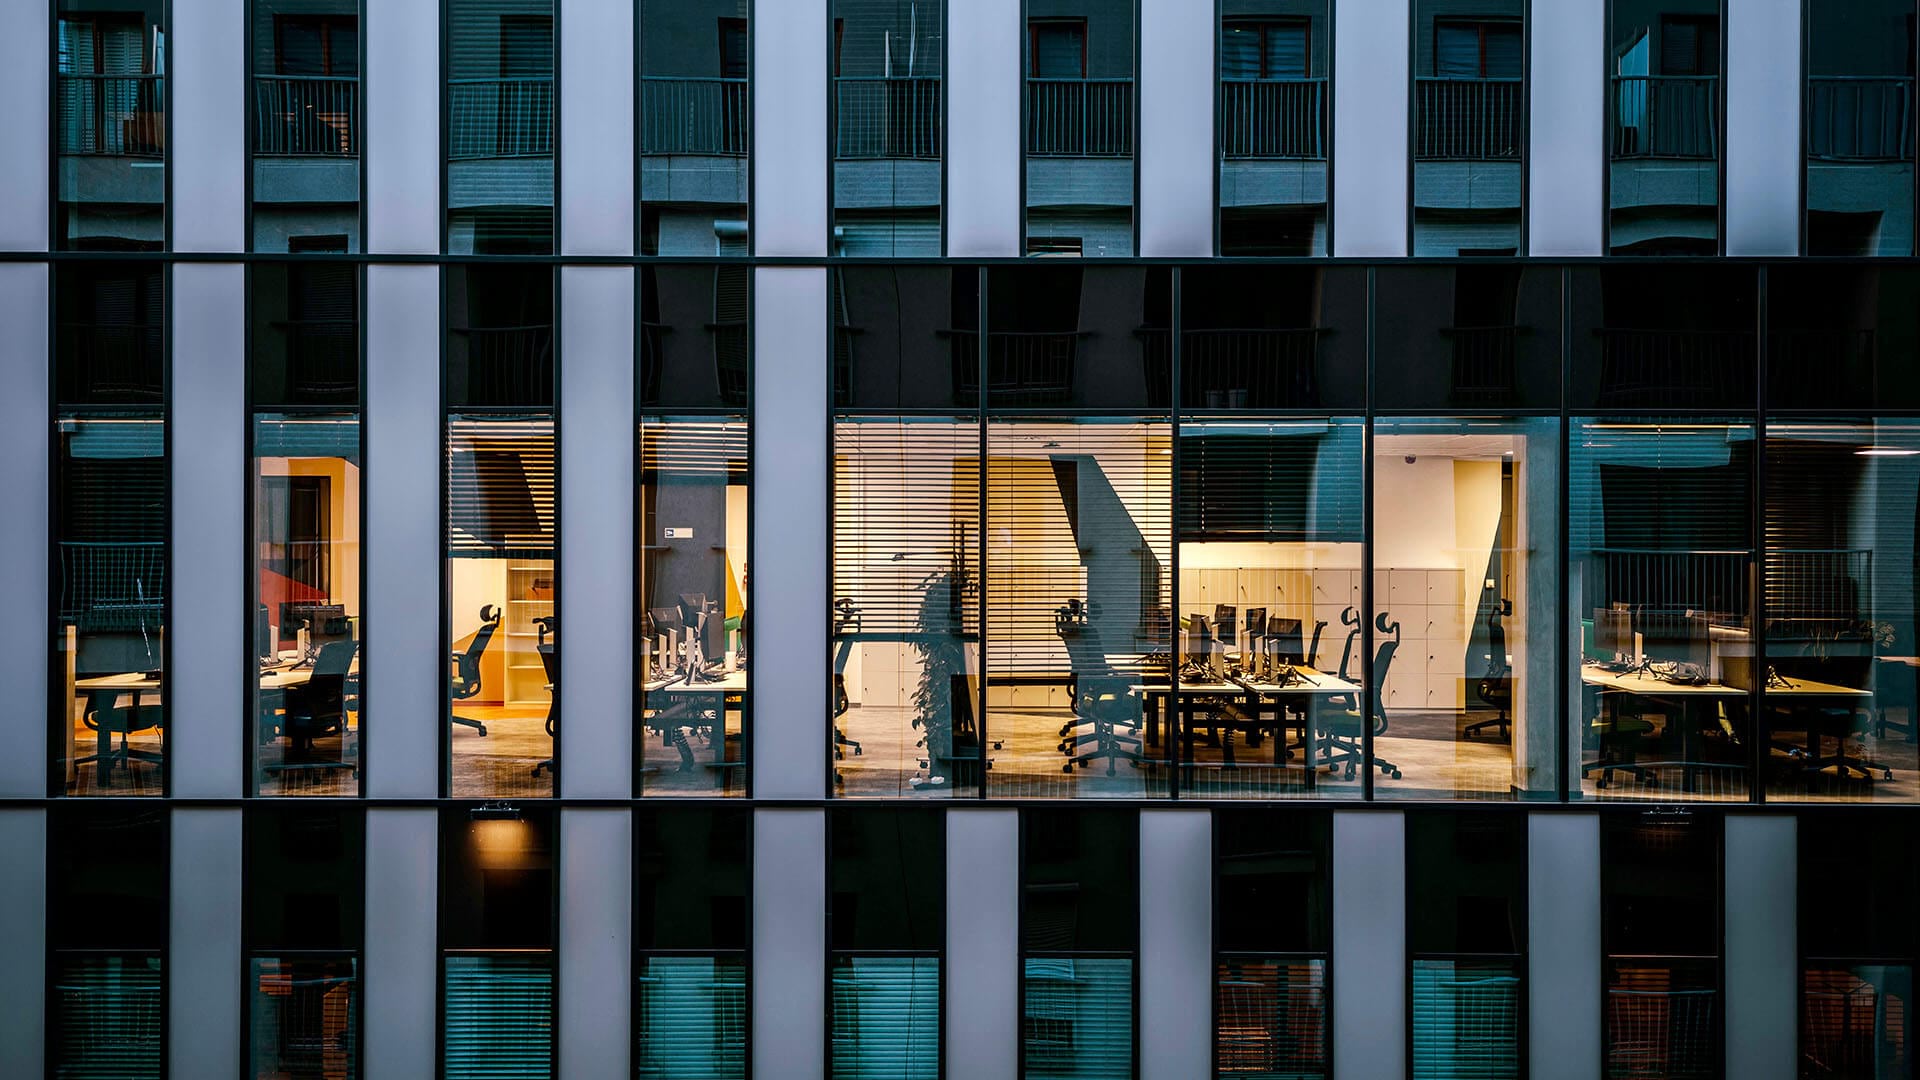 The cross section of an office building represents the CEO and CMO relationship